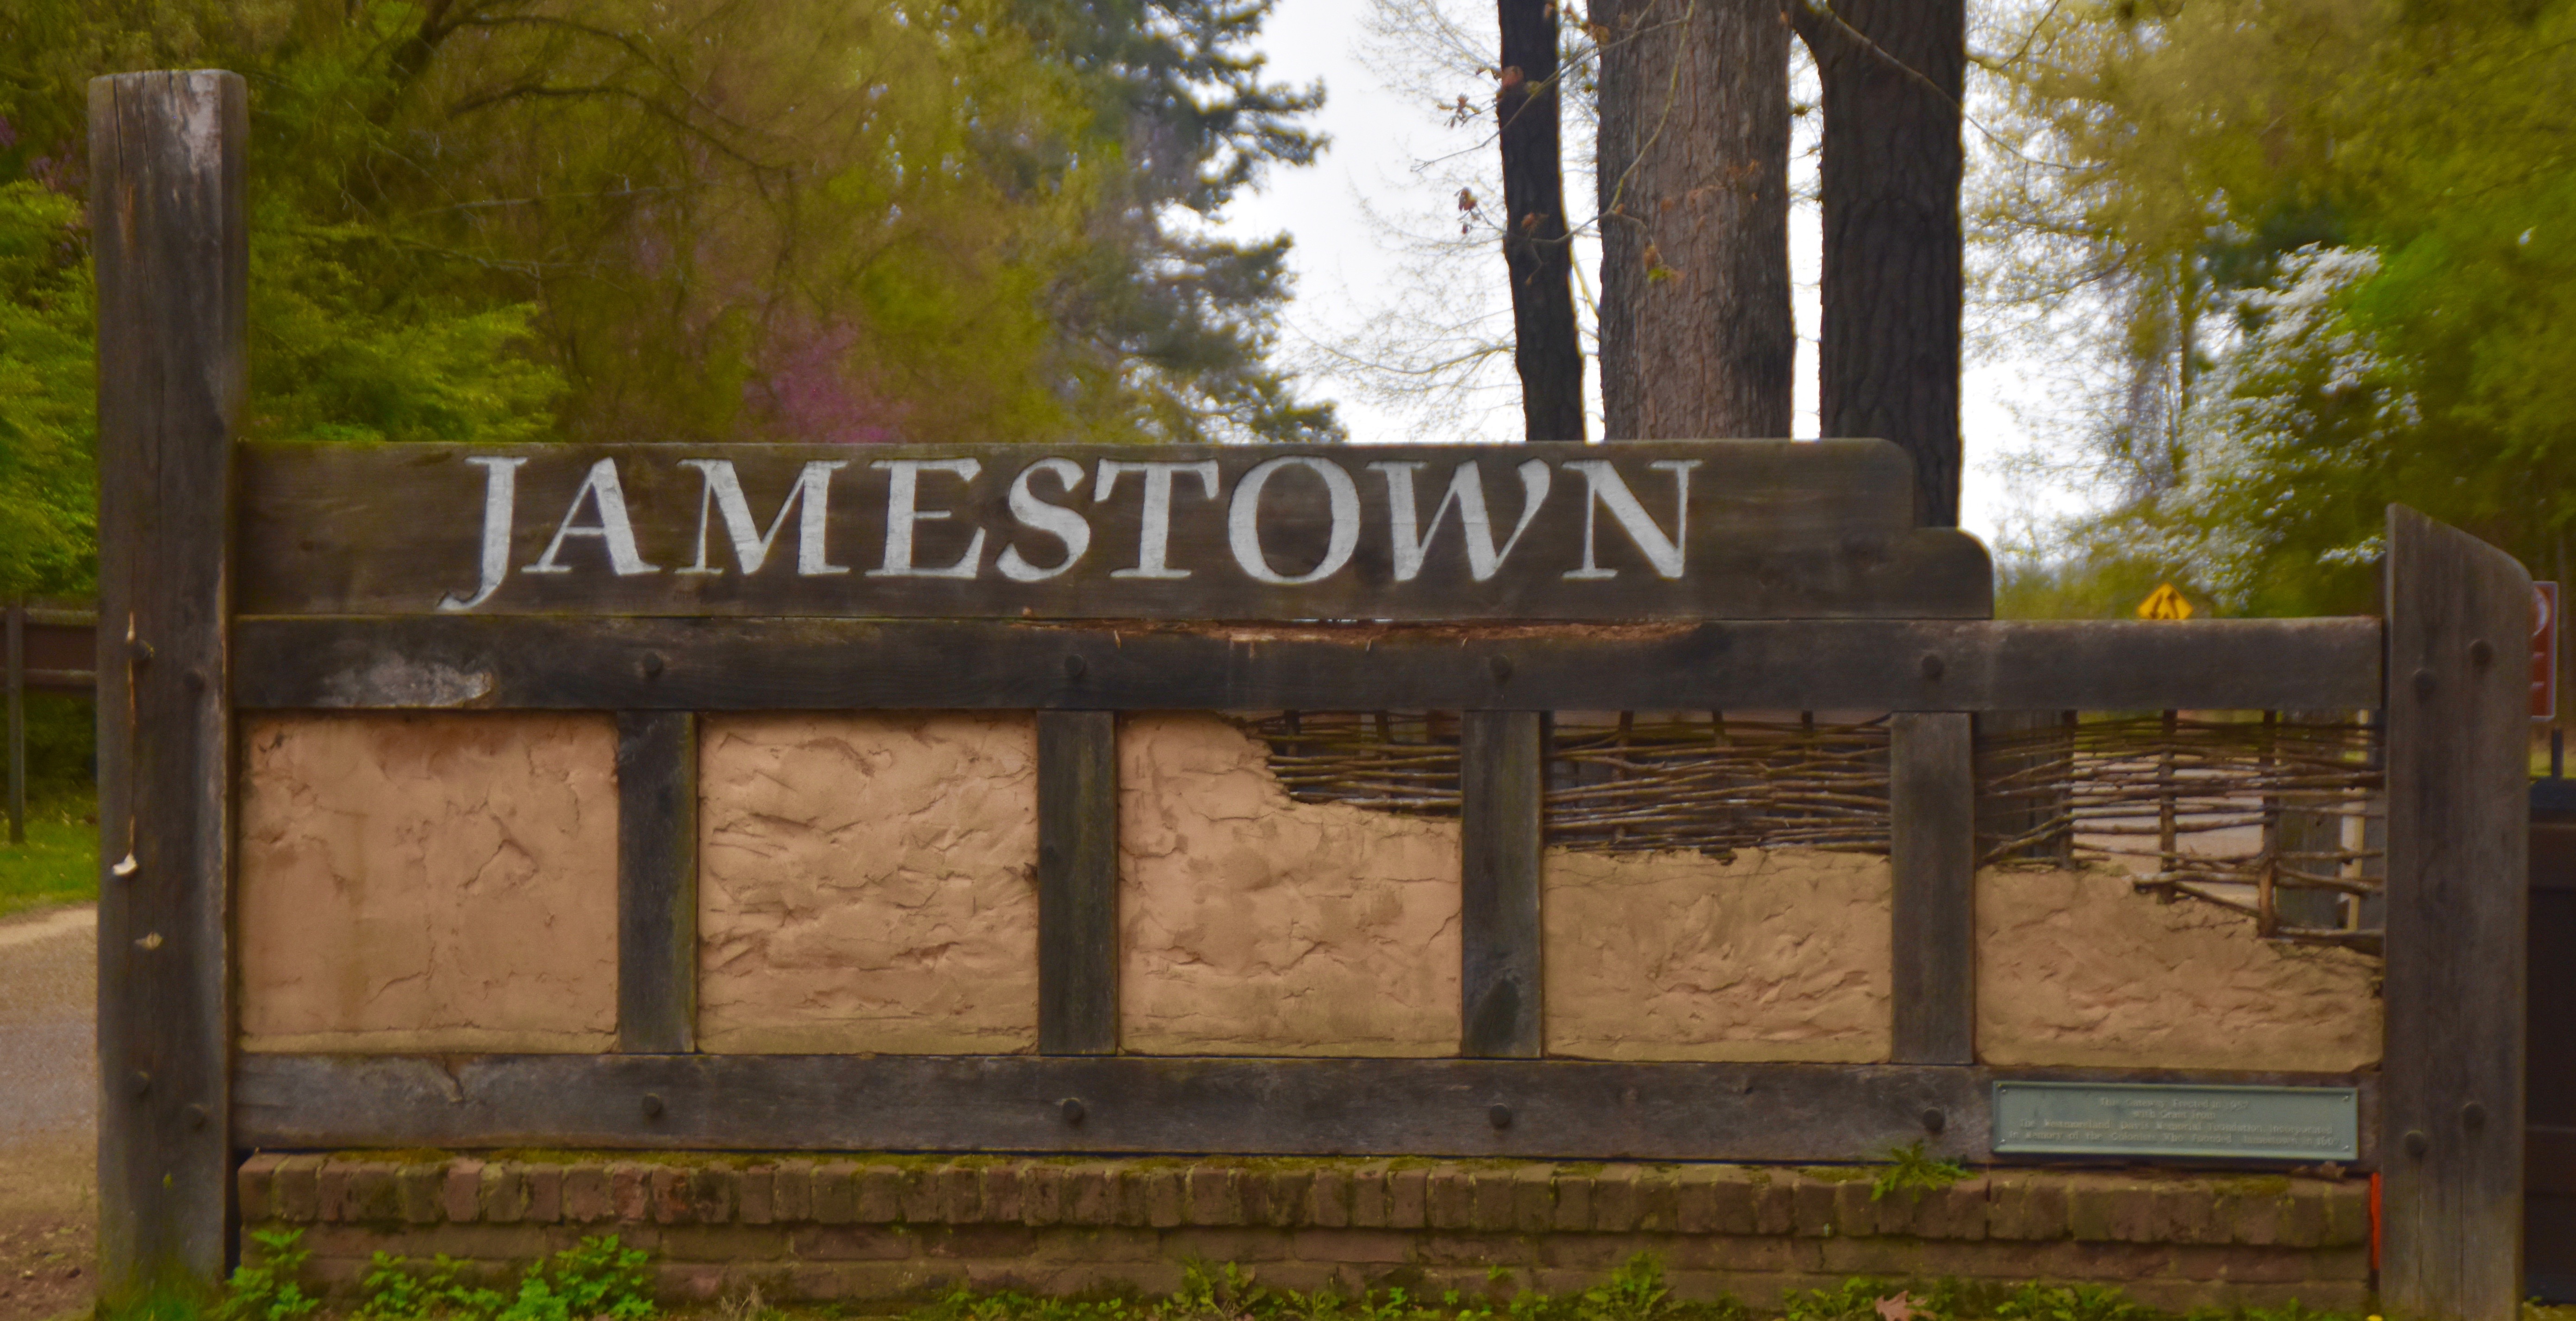 Entrance to Jamestown, Colonial National Historic Park